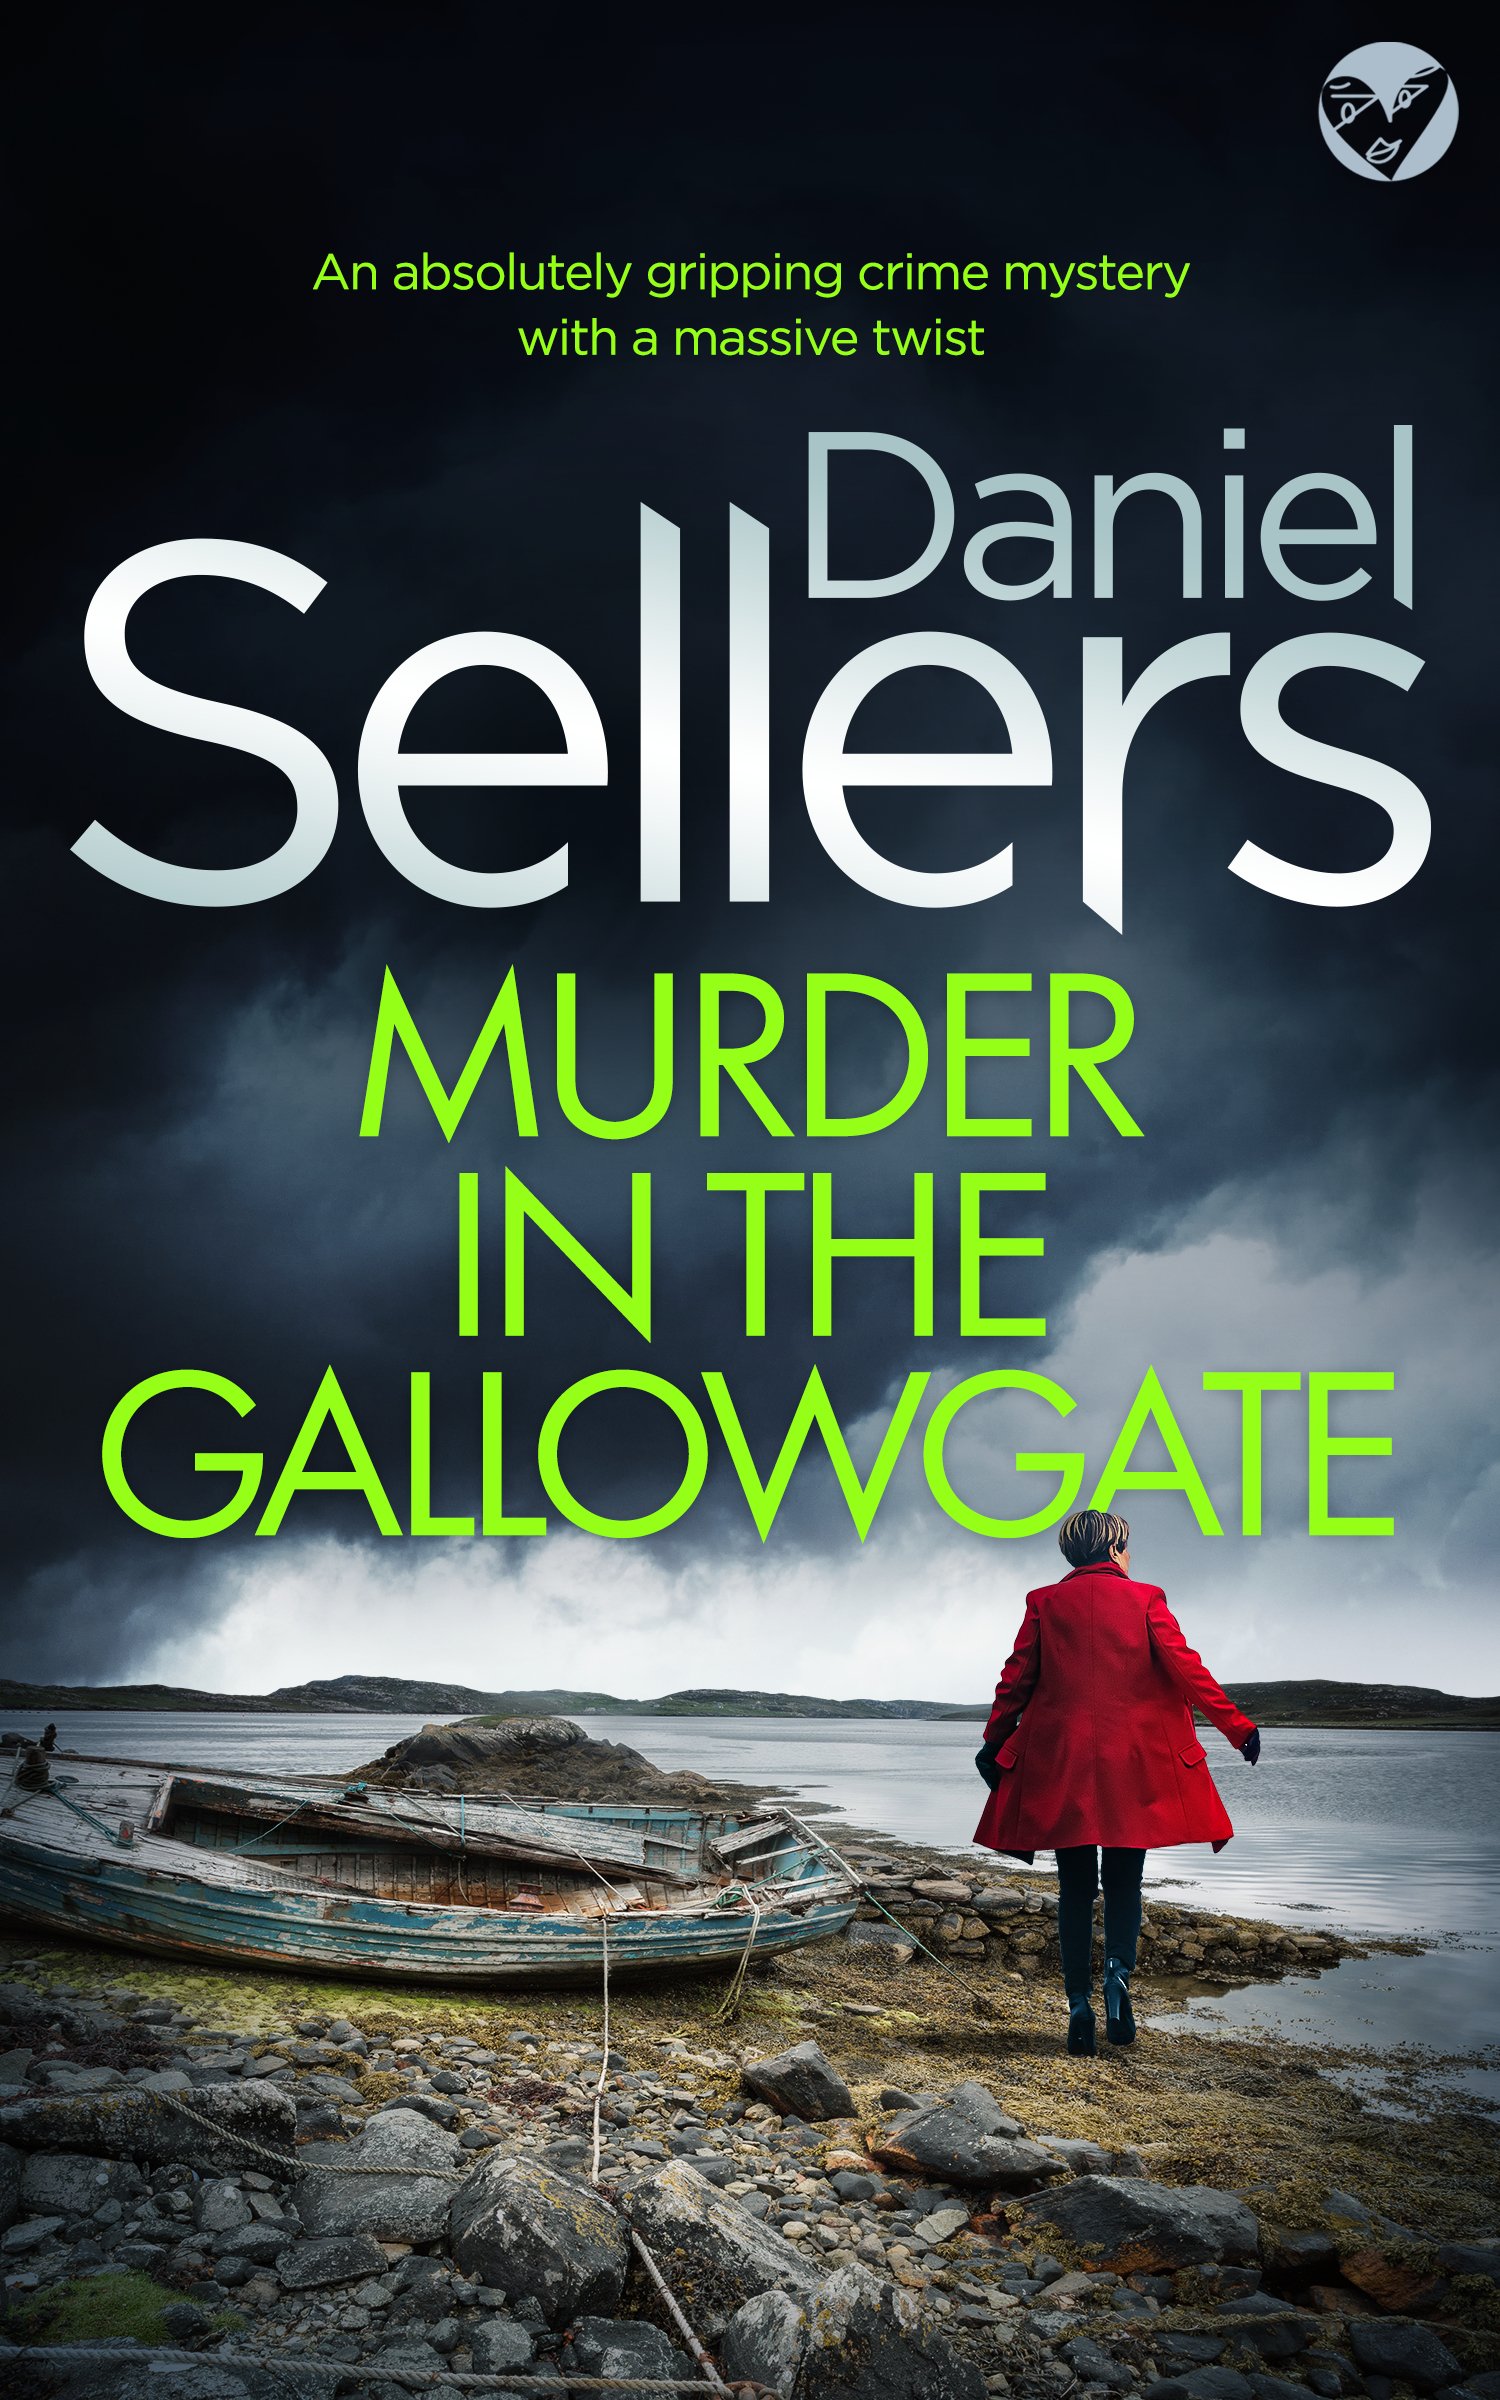 MURDER IN THE GALLOWGATE Cover publish.jpg